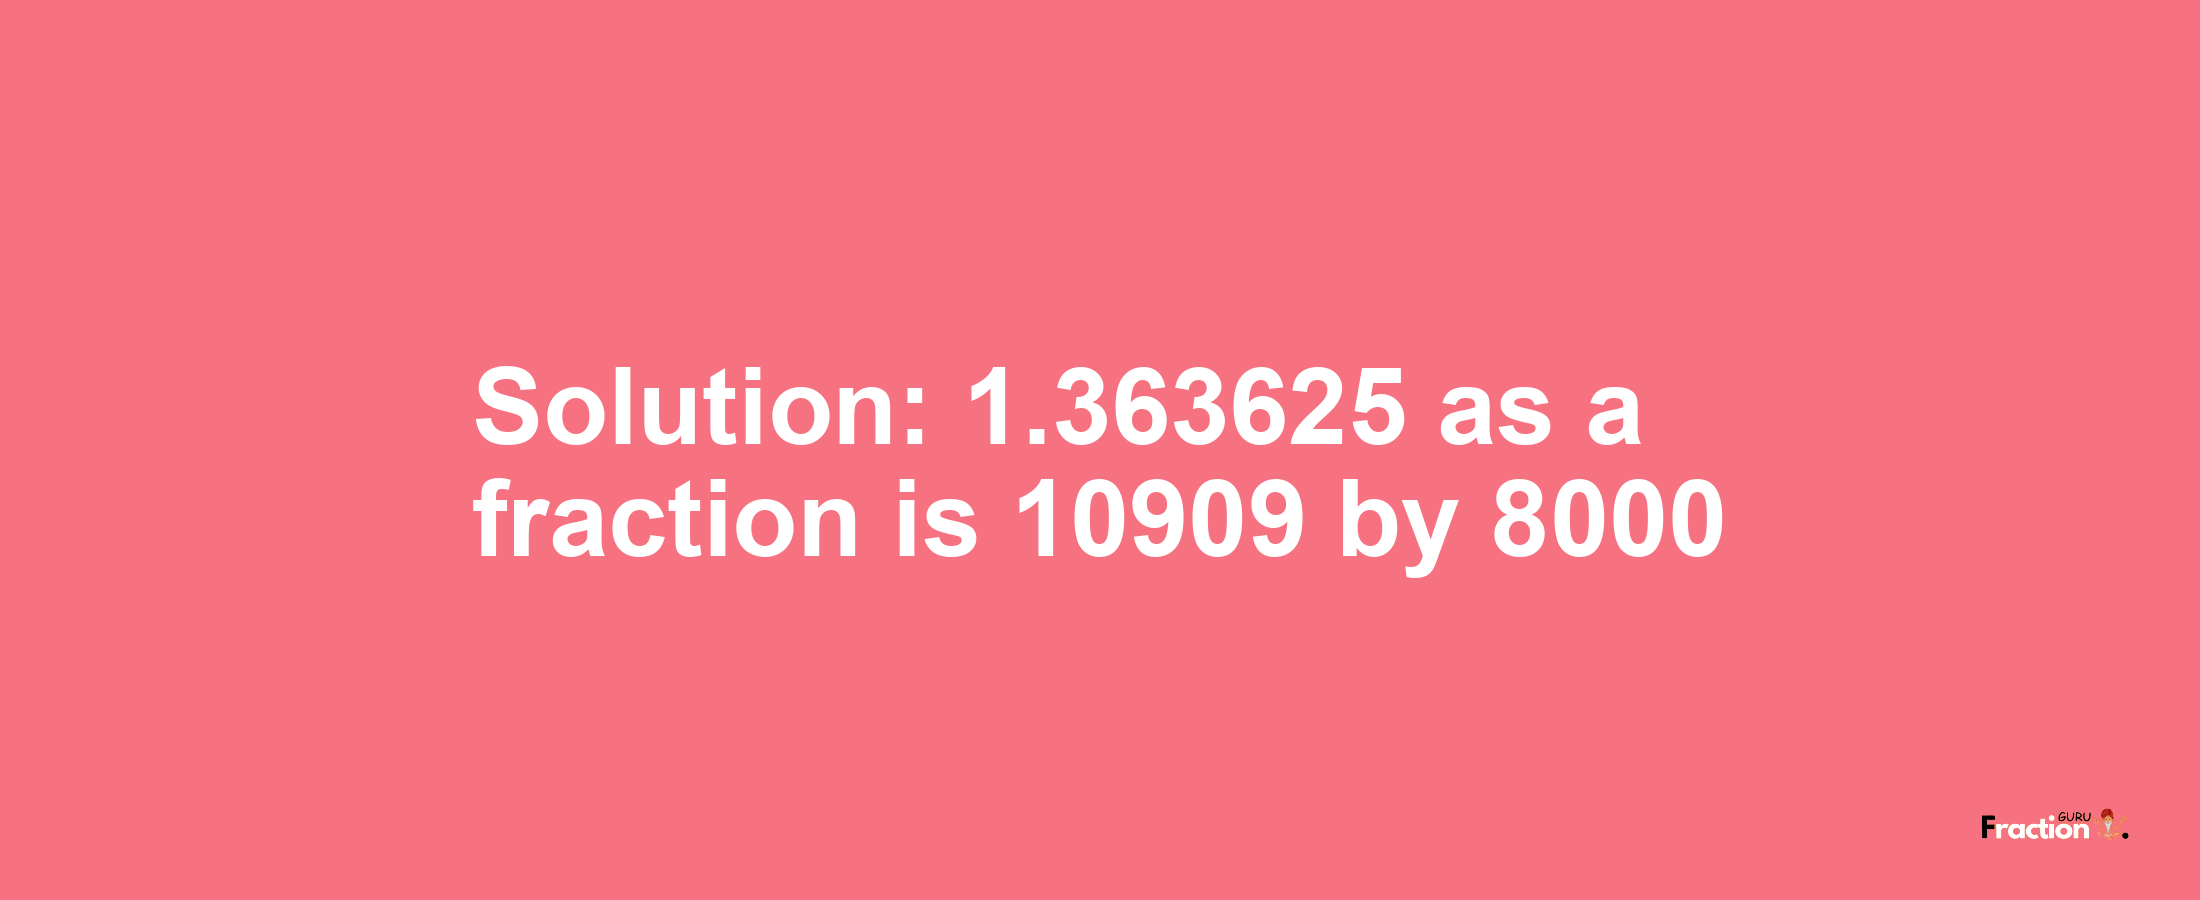 Solution:1.363625 as a fraction is 10909/8000